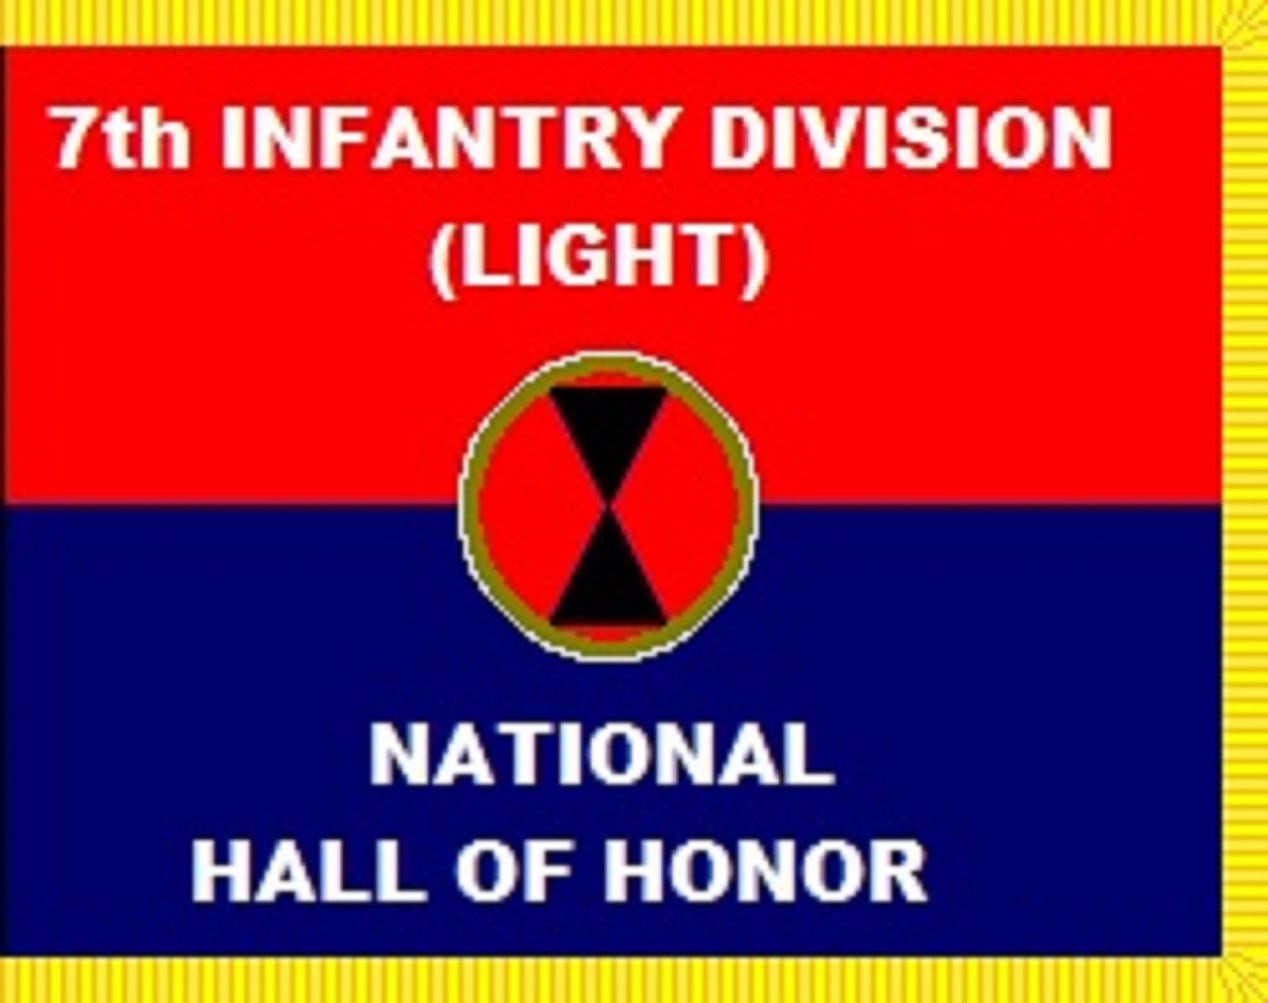 7th INFANTRY DIVISION  LIGHT)  NATIONAL HALL OF HONOR